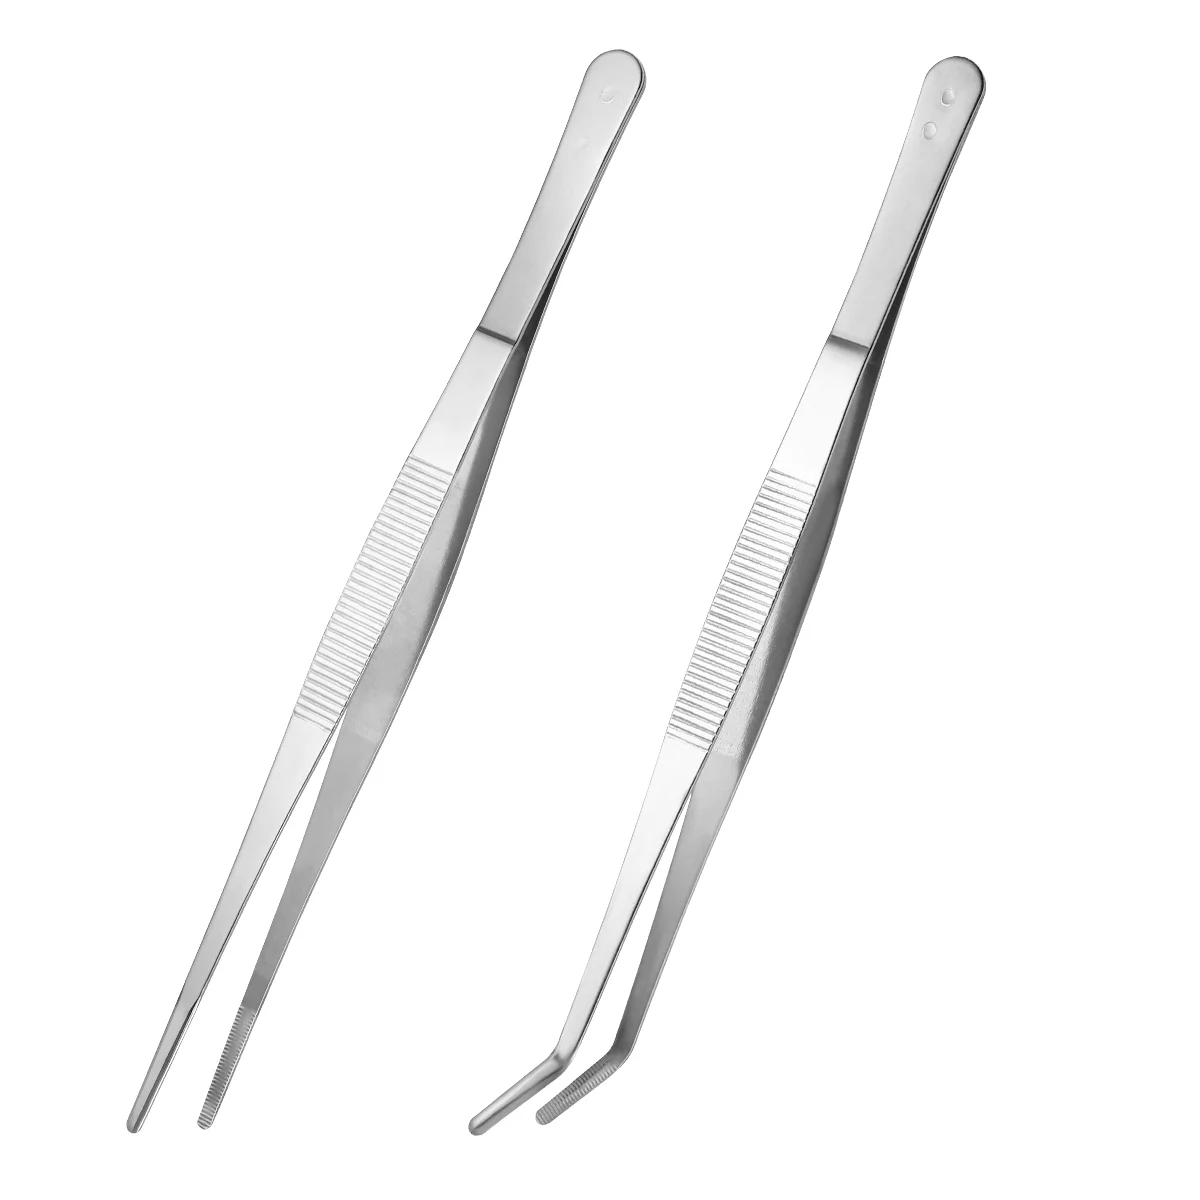 

Tweezers Stainless Steel Straight And Curved Nippers Tweezers Feeding Tongs For Reptile Snakes Lizards Spider (Silver)